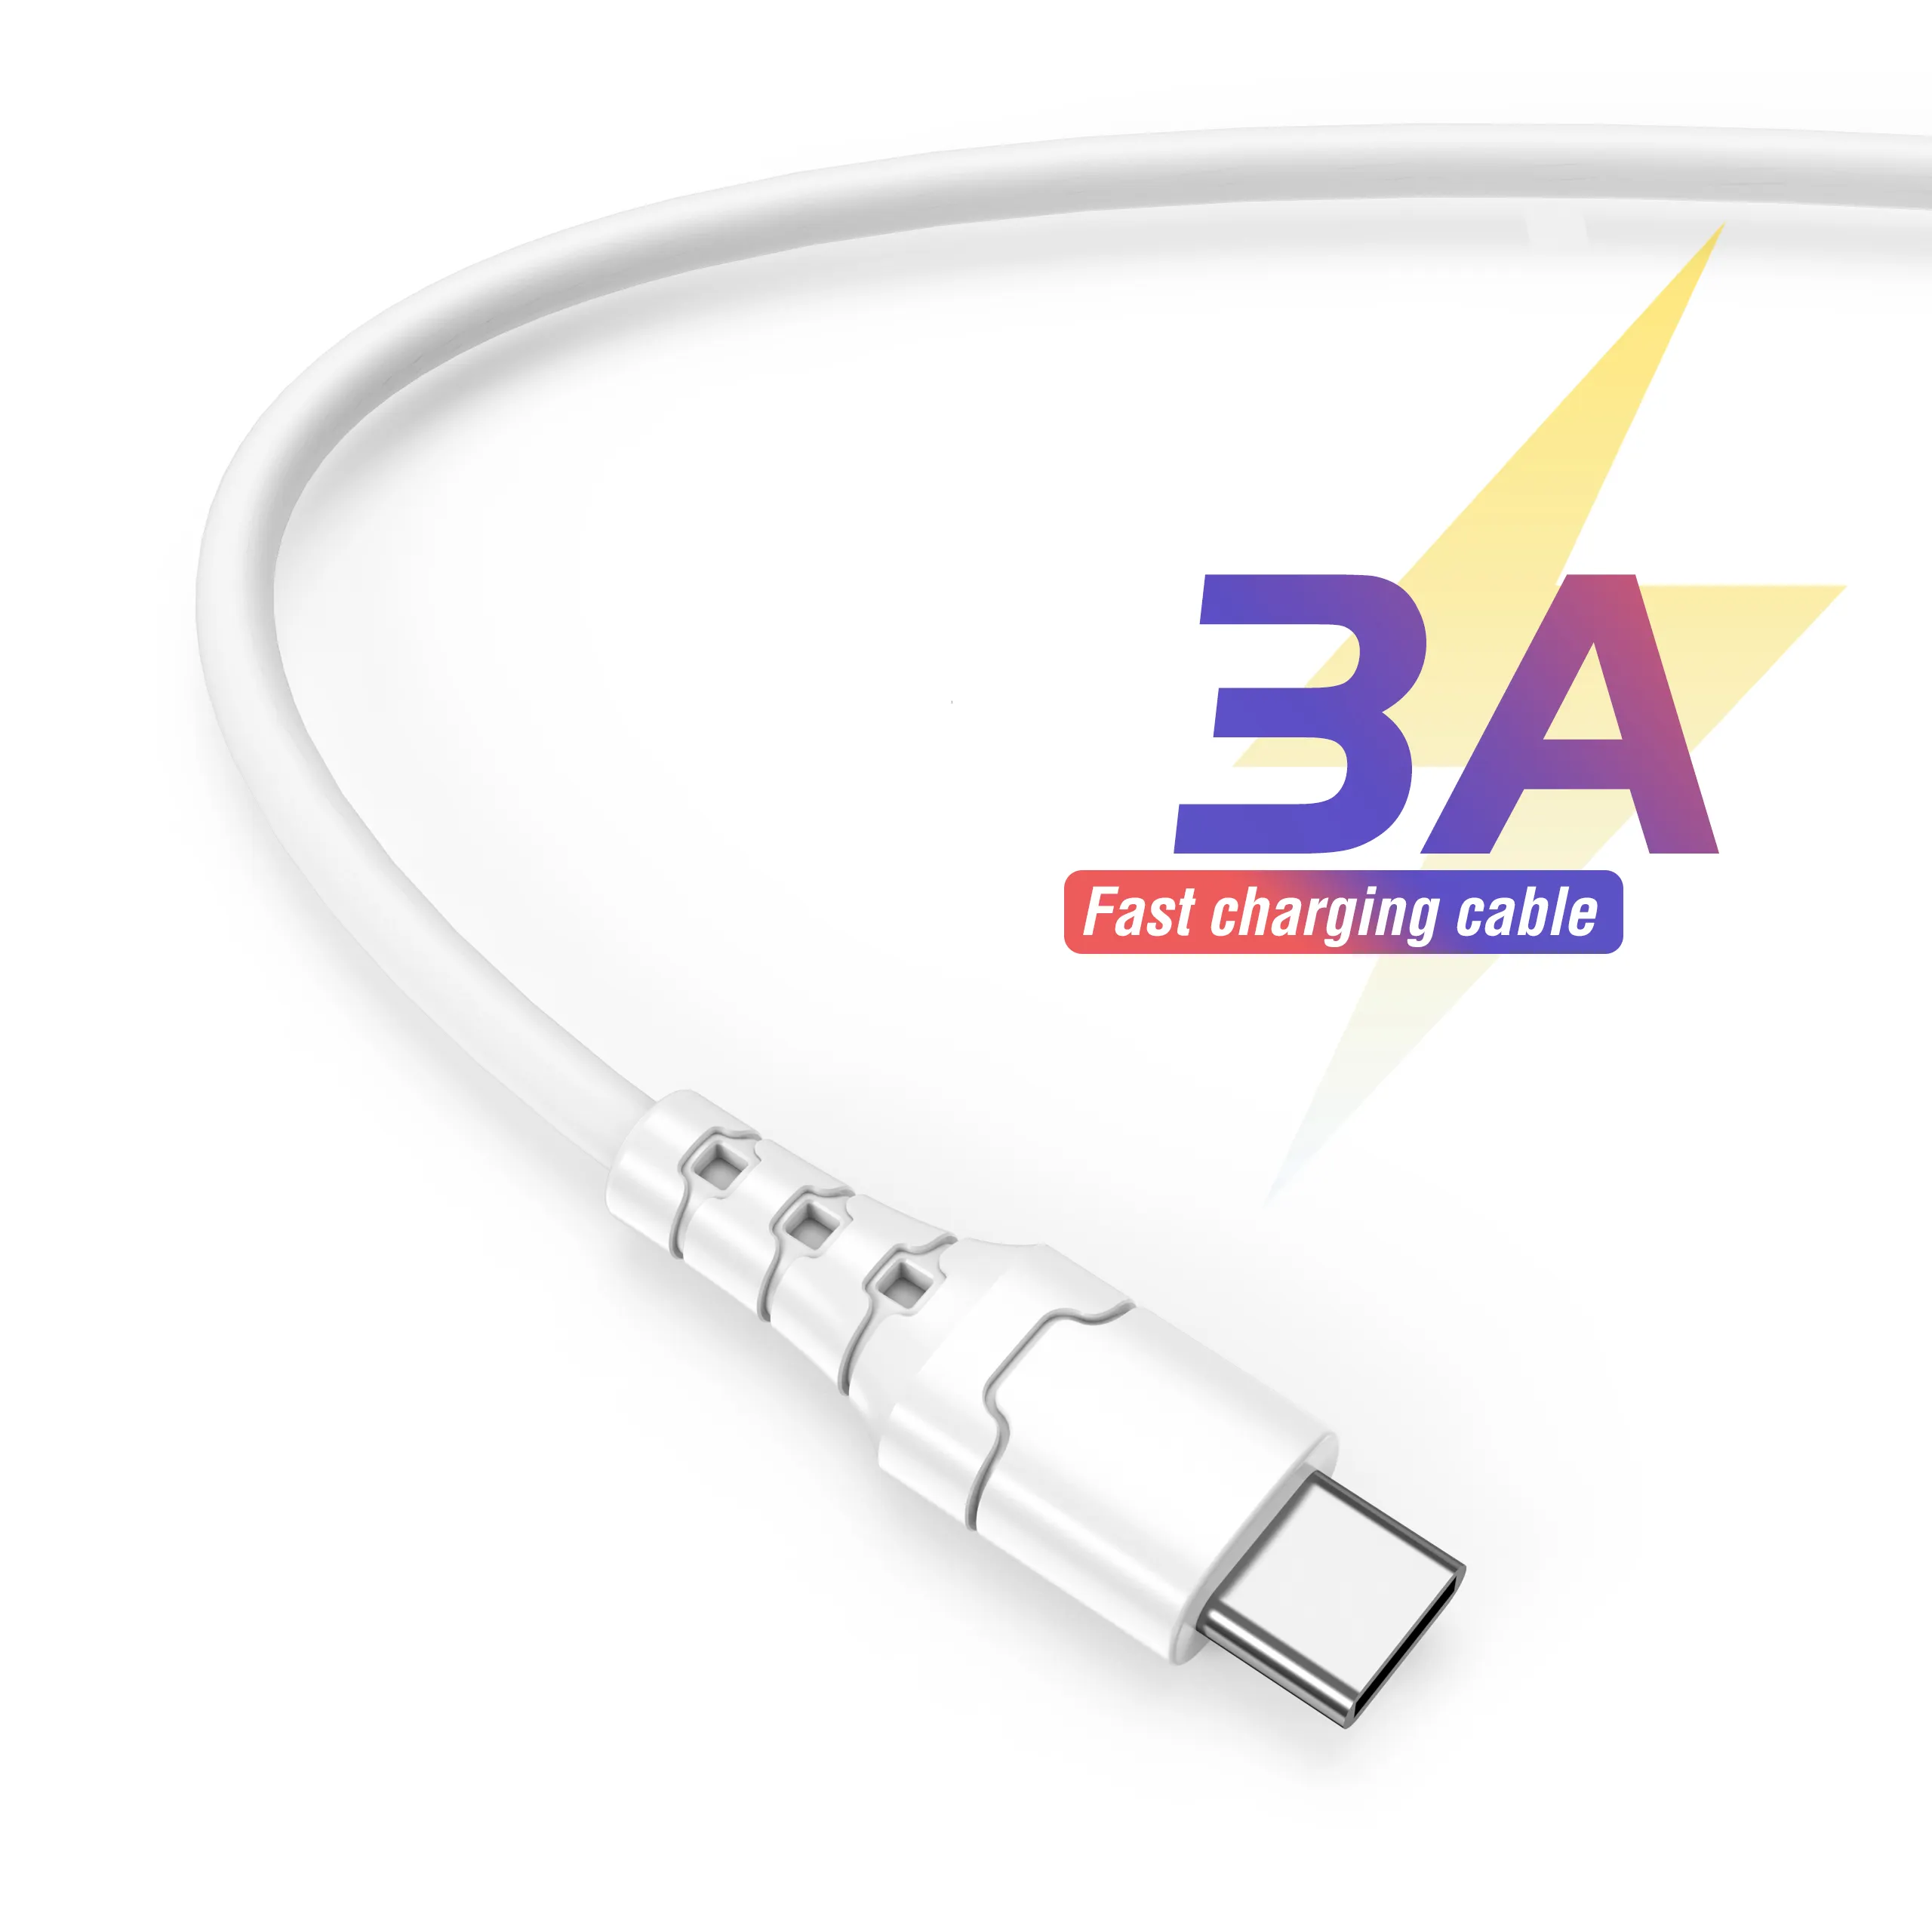 Aspor Original Usb To Lighting Cable For Iphone 3a Mini Usb Cable Oraimo Fast Charging Data Cable